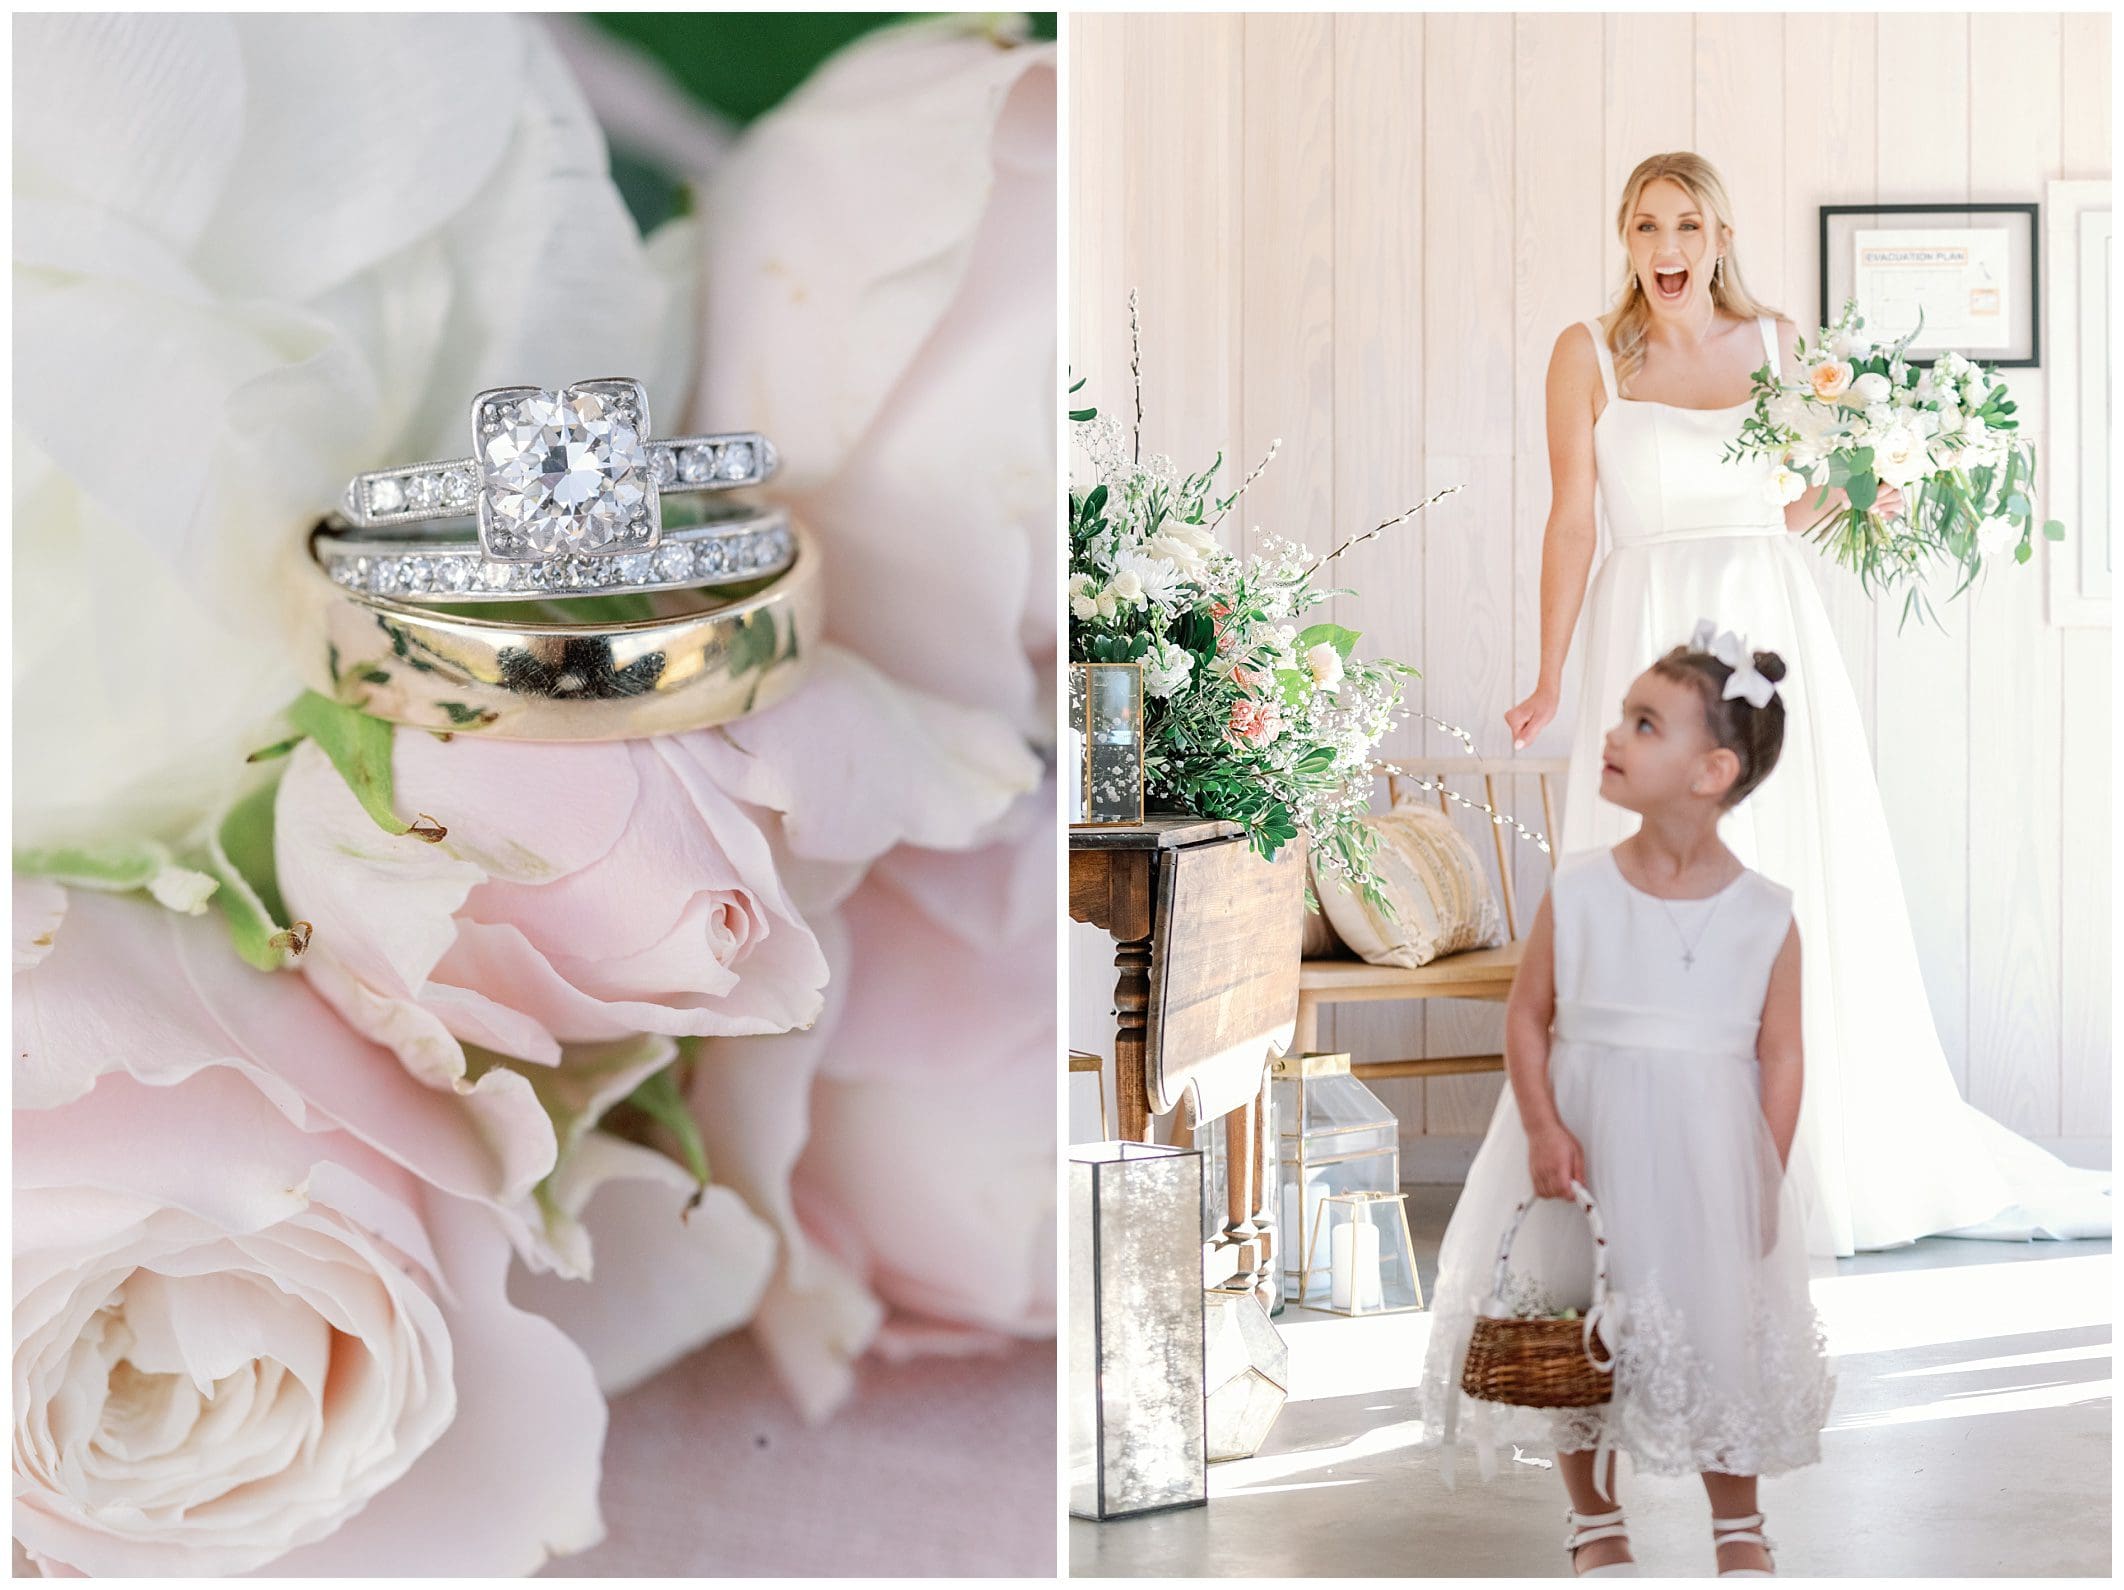 A bride in a white dress and a little girl in a pink dress.